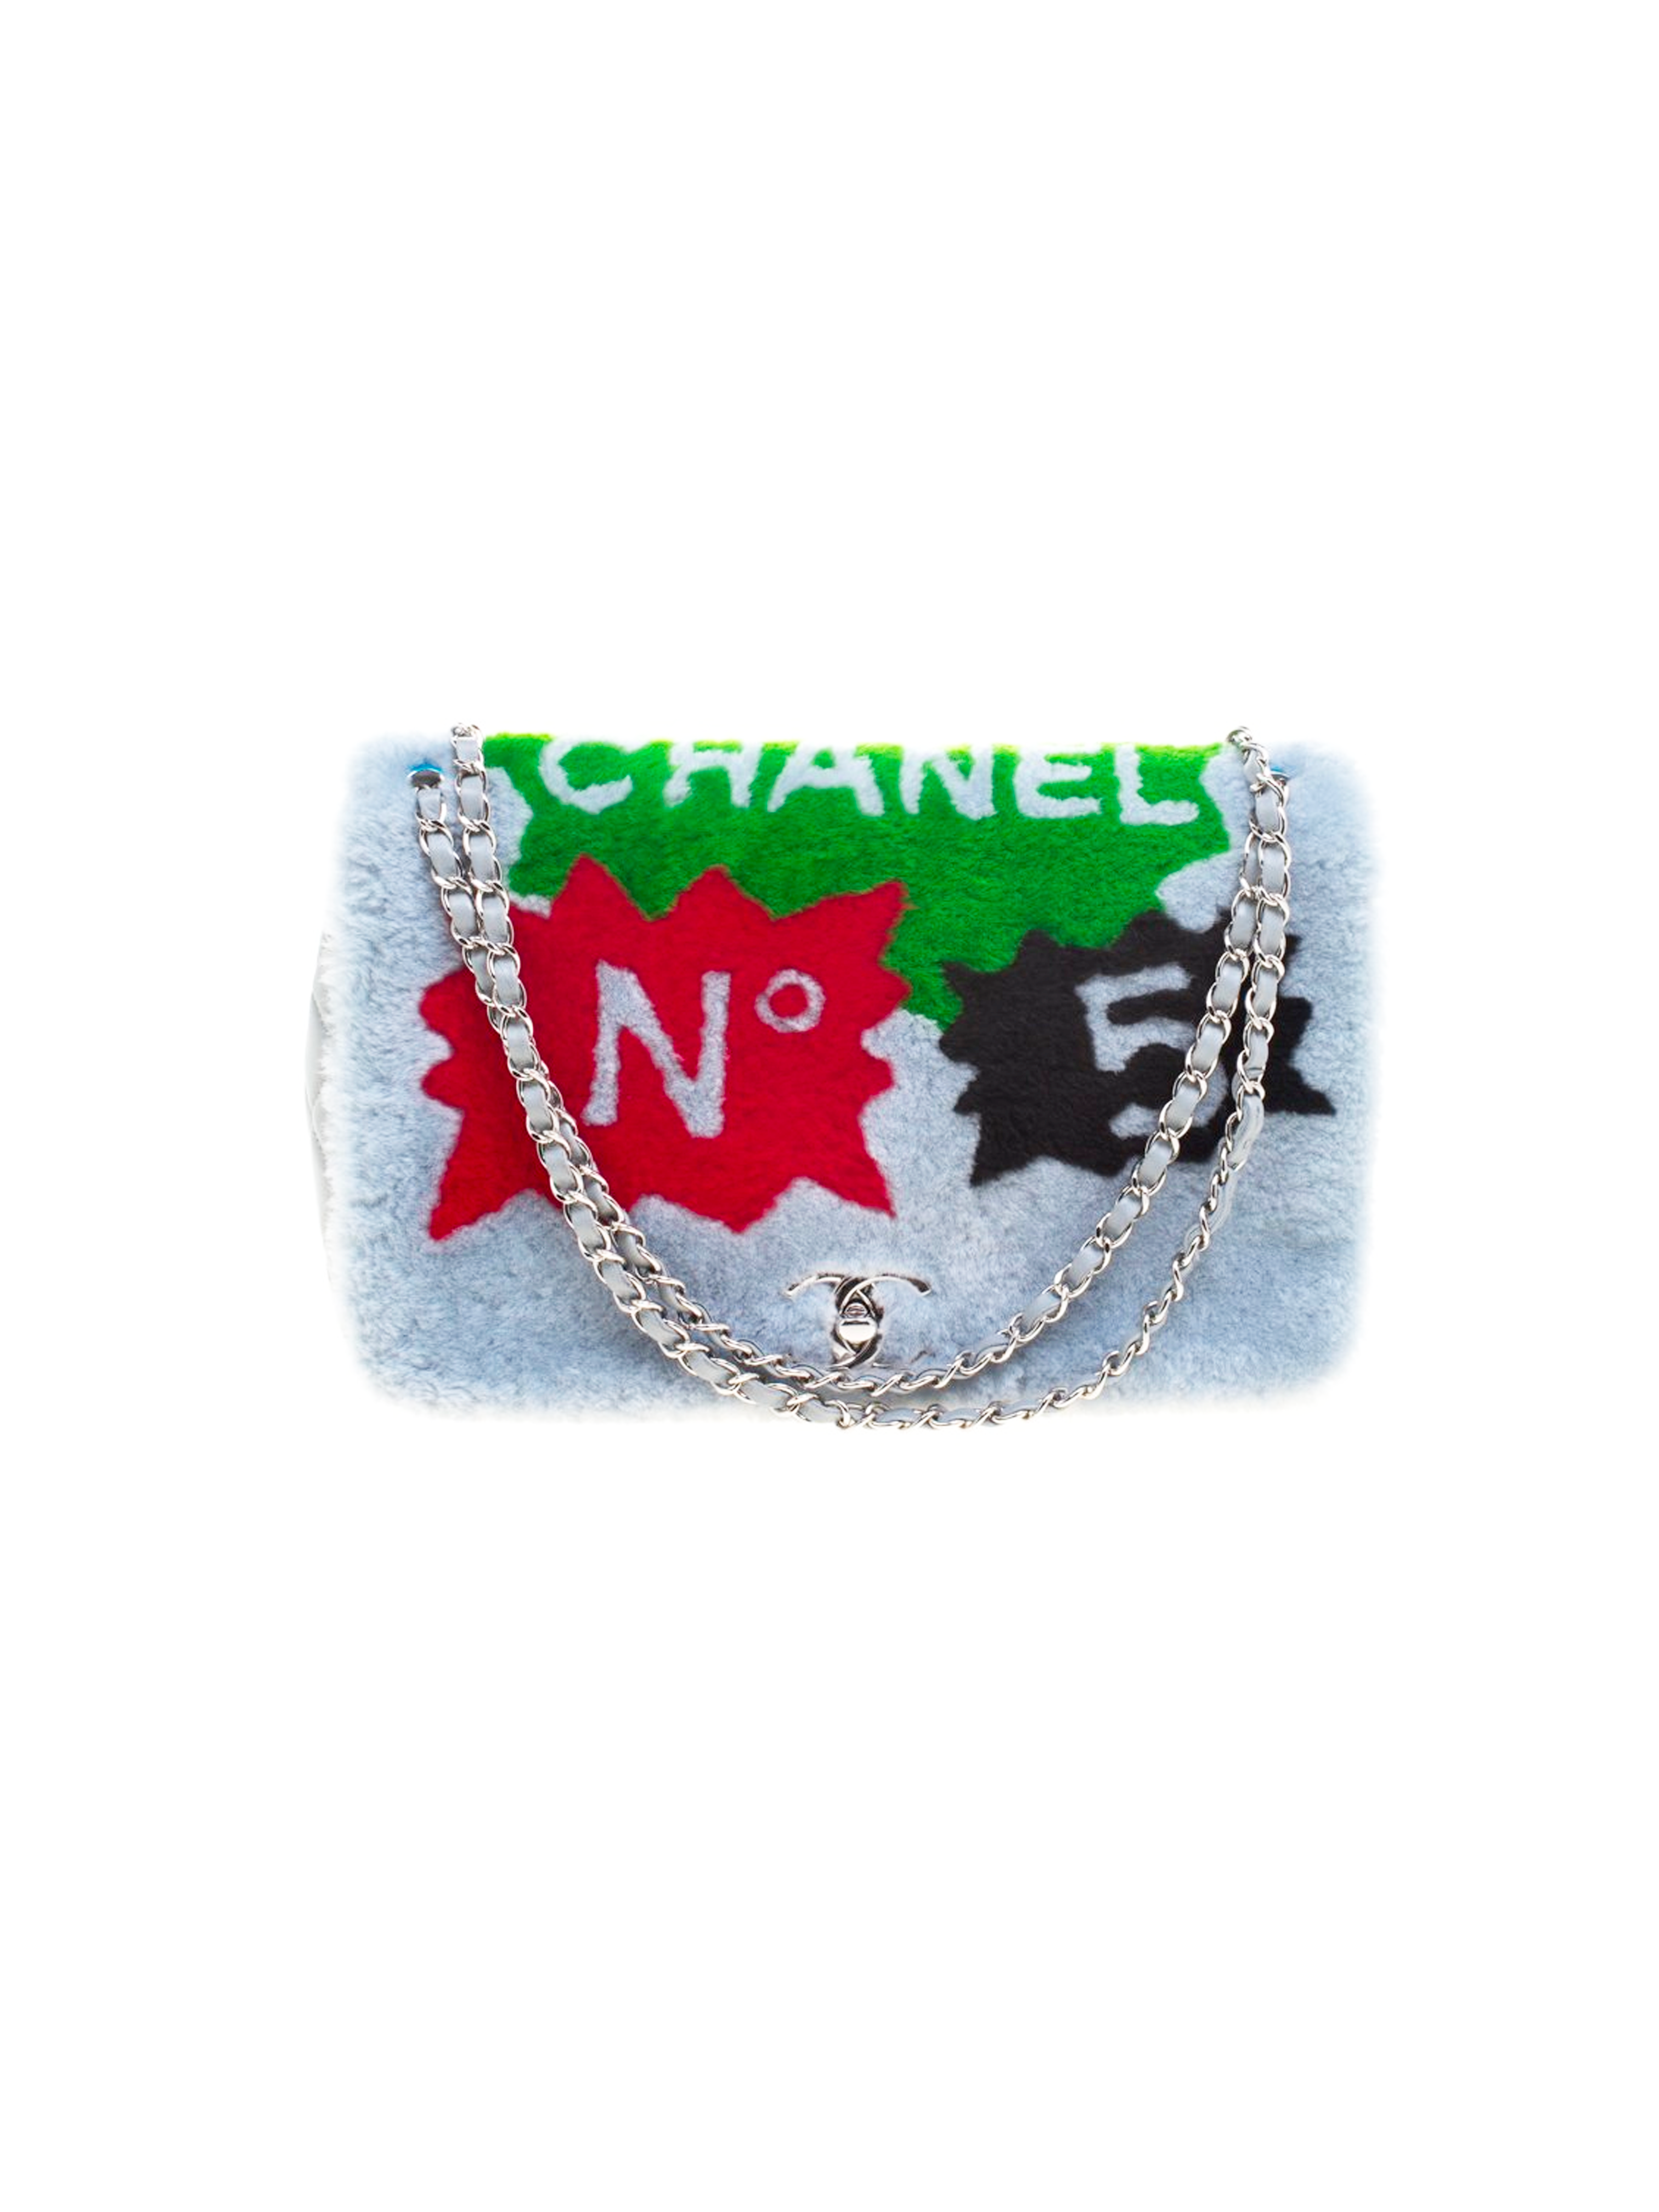 CHANEL Pop Art N°5 Bag in Graffiti Leather and Shearling Fabric at 1stDibs